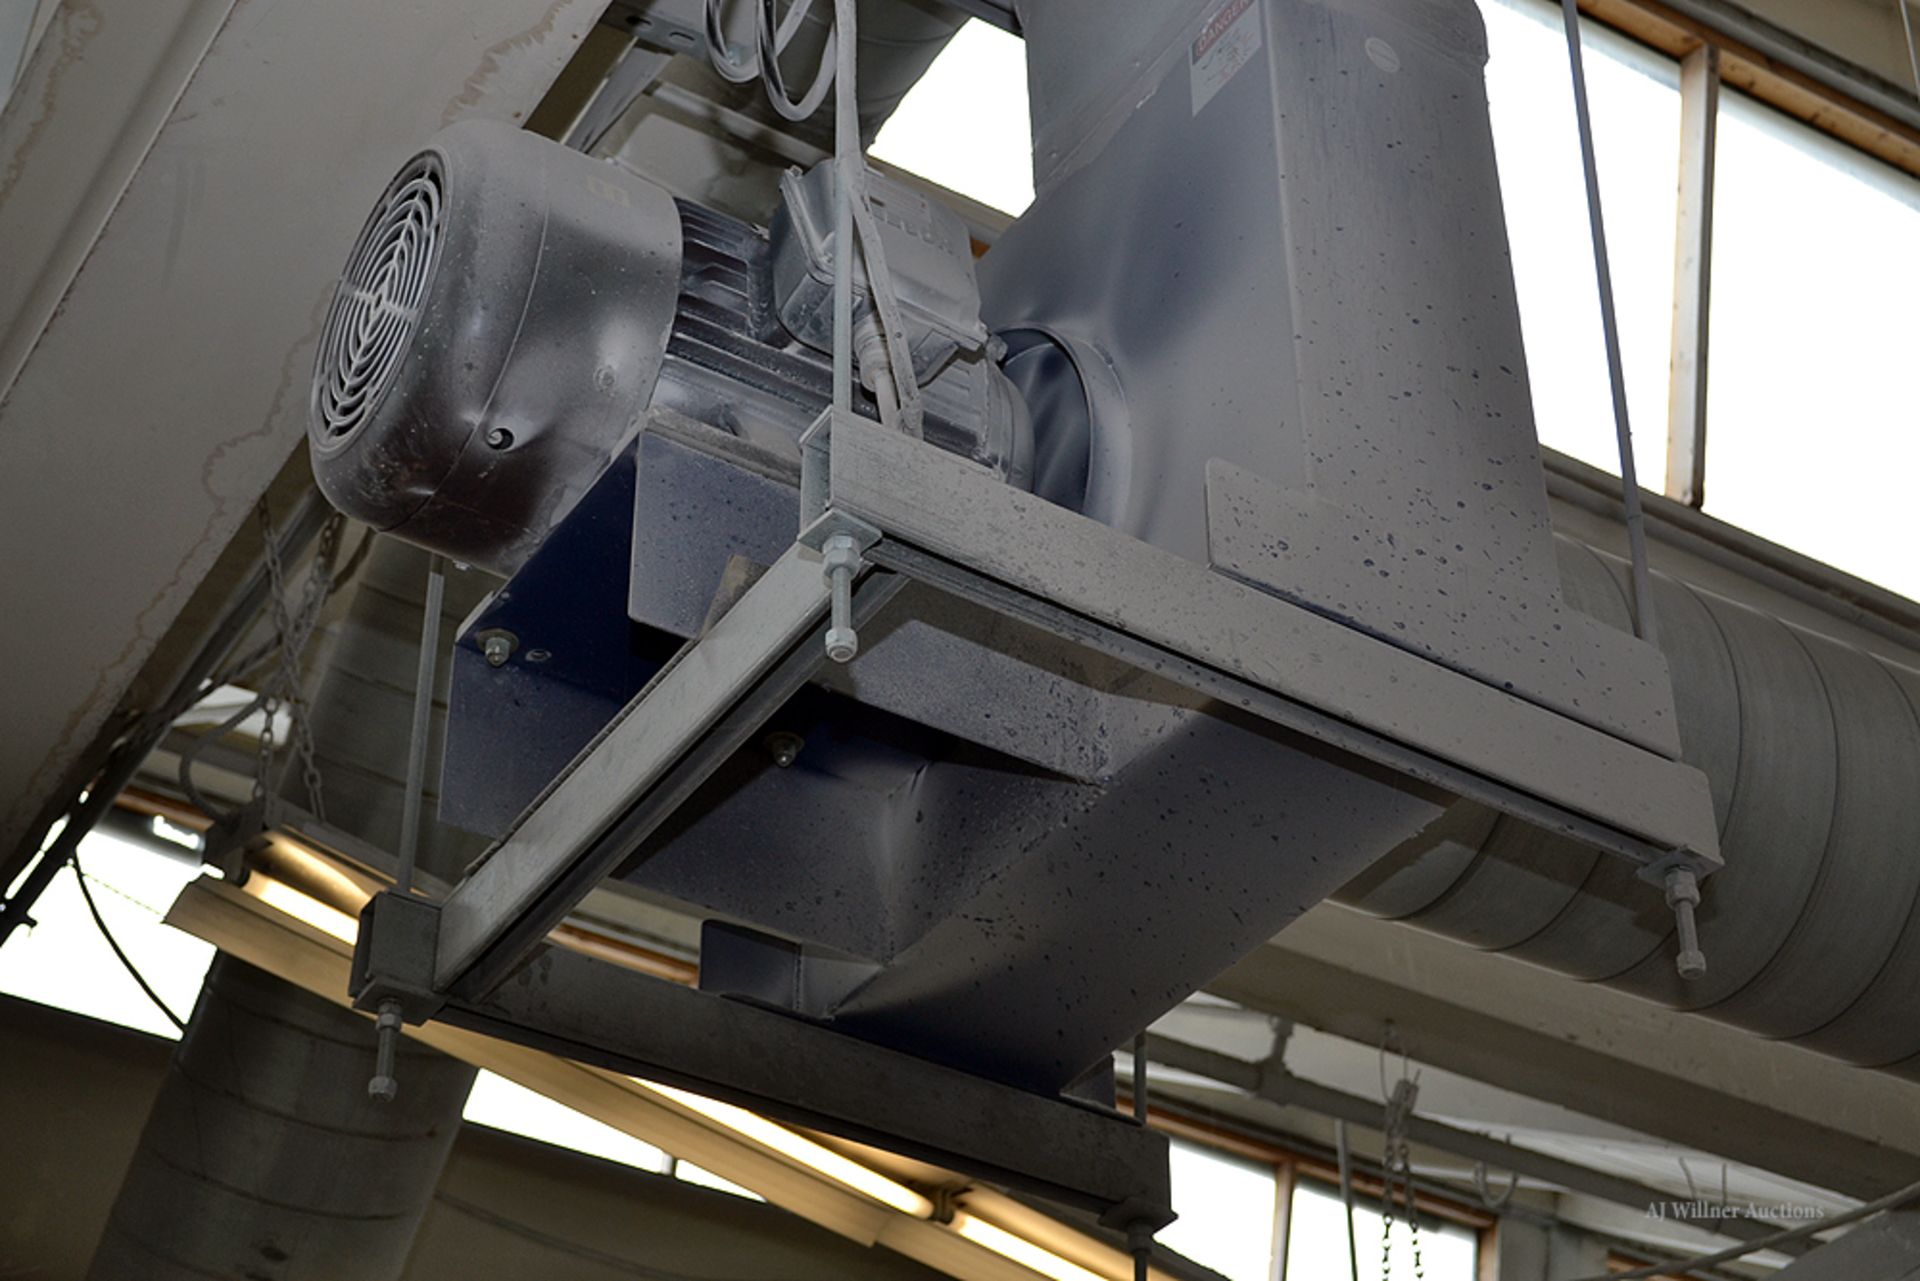 6-Bag Dust Collection System w/ Ceiling Mounted Motor & Duct Work - Image 2 of 5